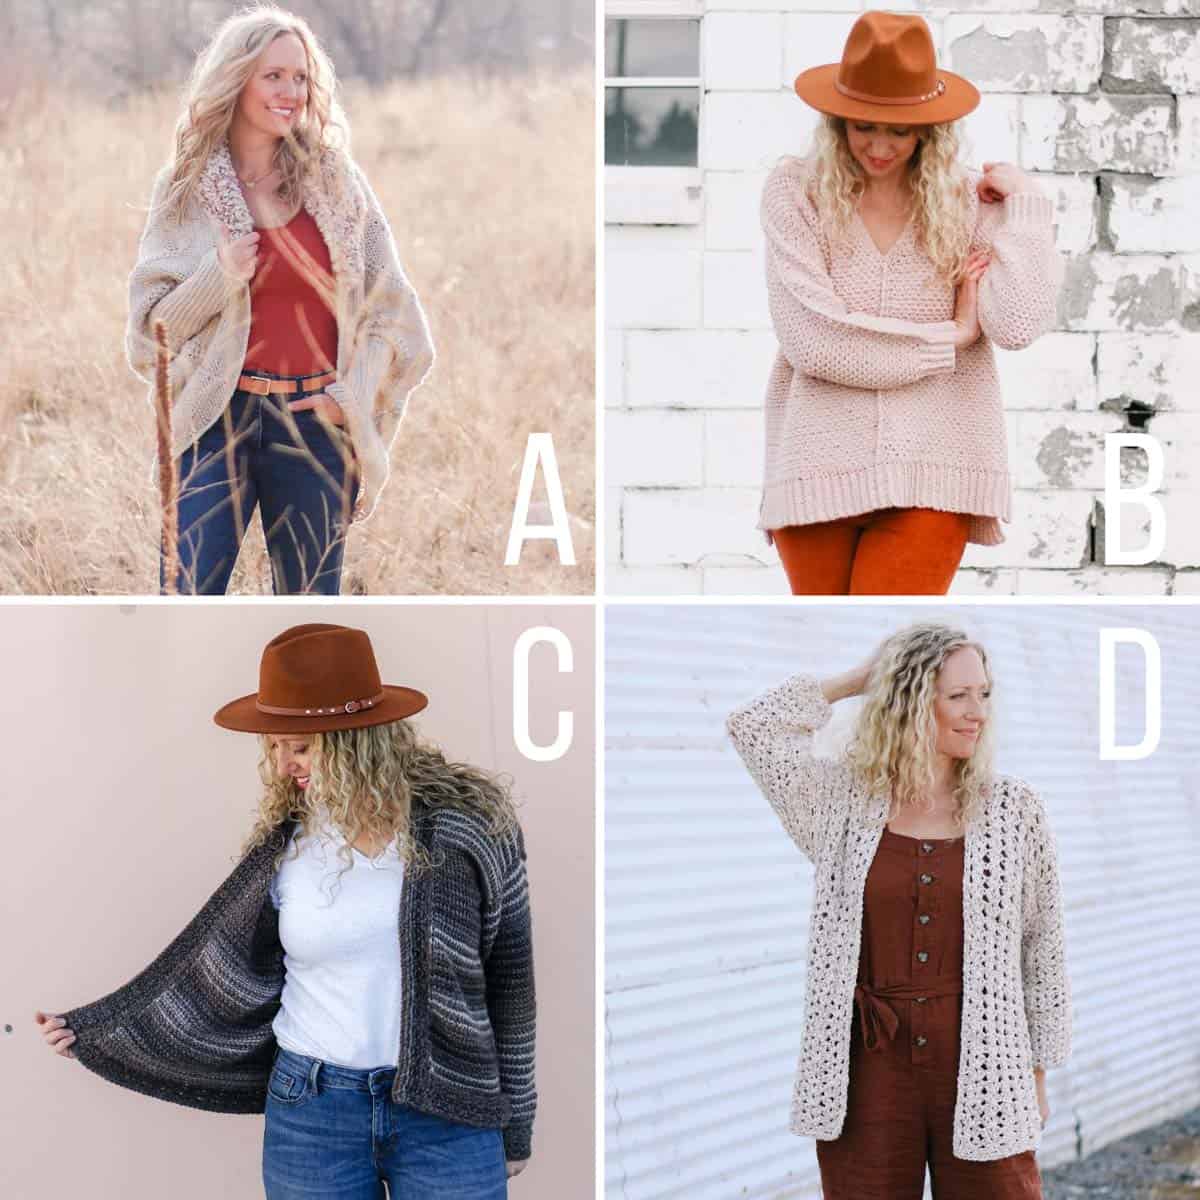 Grid of four crochet sweater patterns. One is a cocoon cardigan with faux fur collar, one is a simple pullover crochet sweater, one is a reversible Tunisian crochet cardigan and one is a simple crochet jacket sweater.